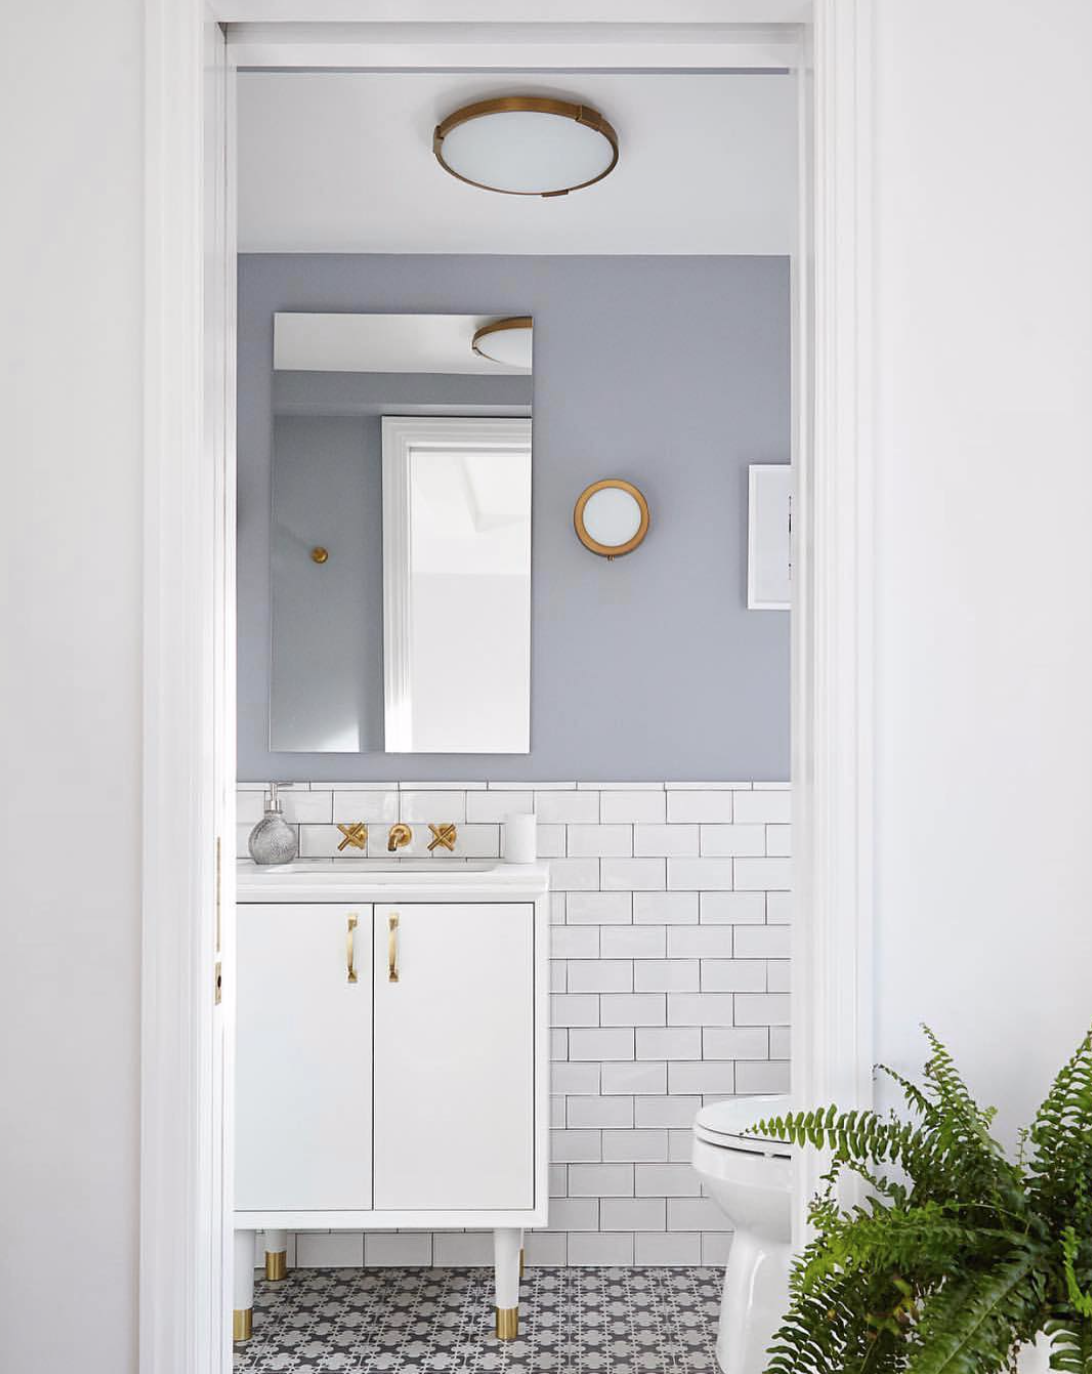   @lra_architecture  created a bright and airy powder room through the combination of sleek fixtures and a clean color palette. 